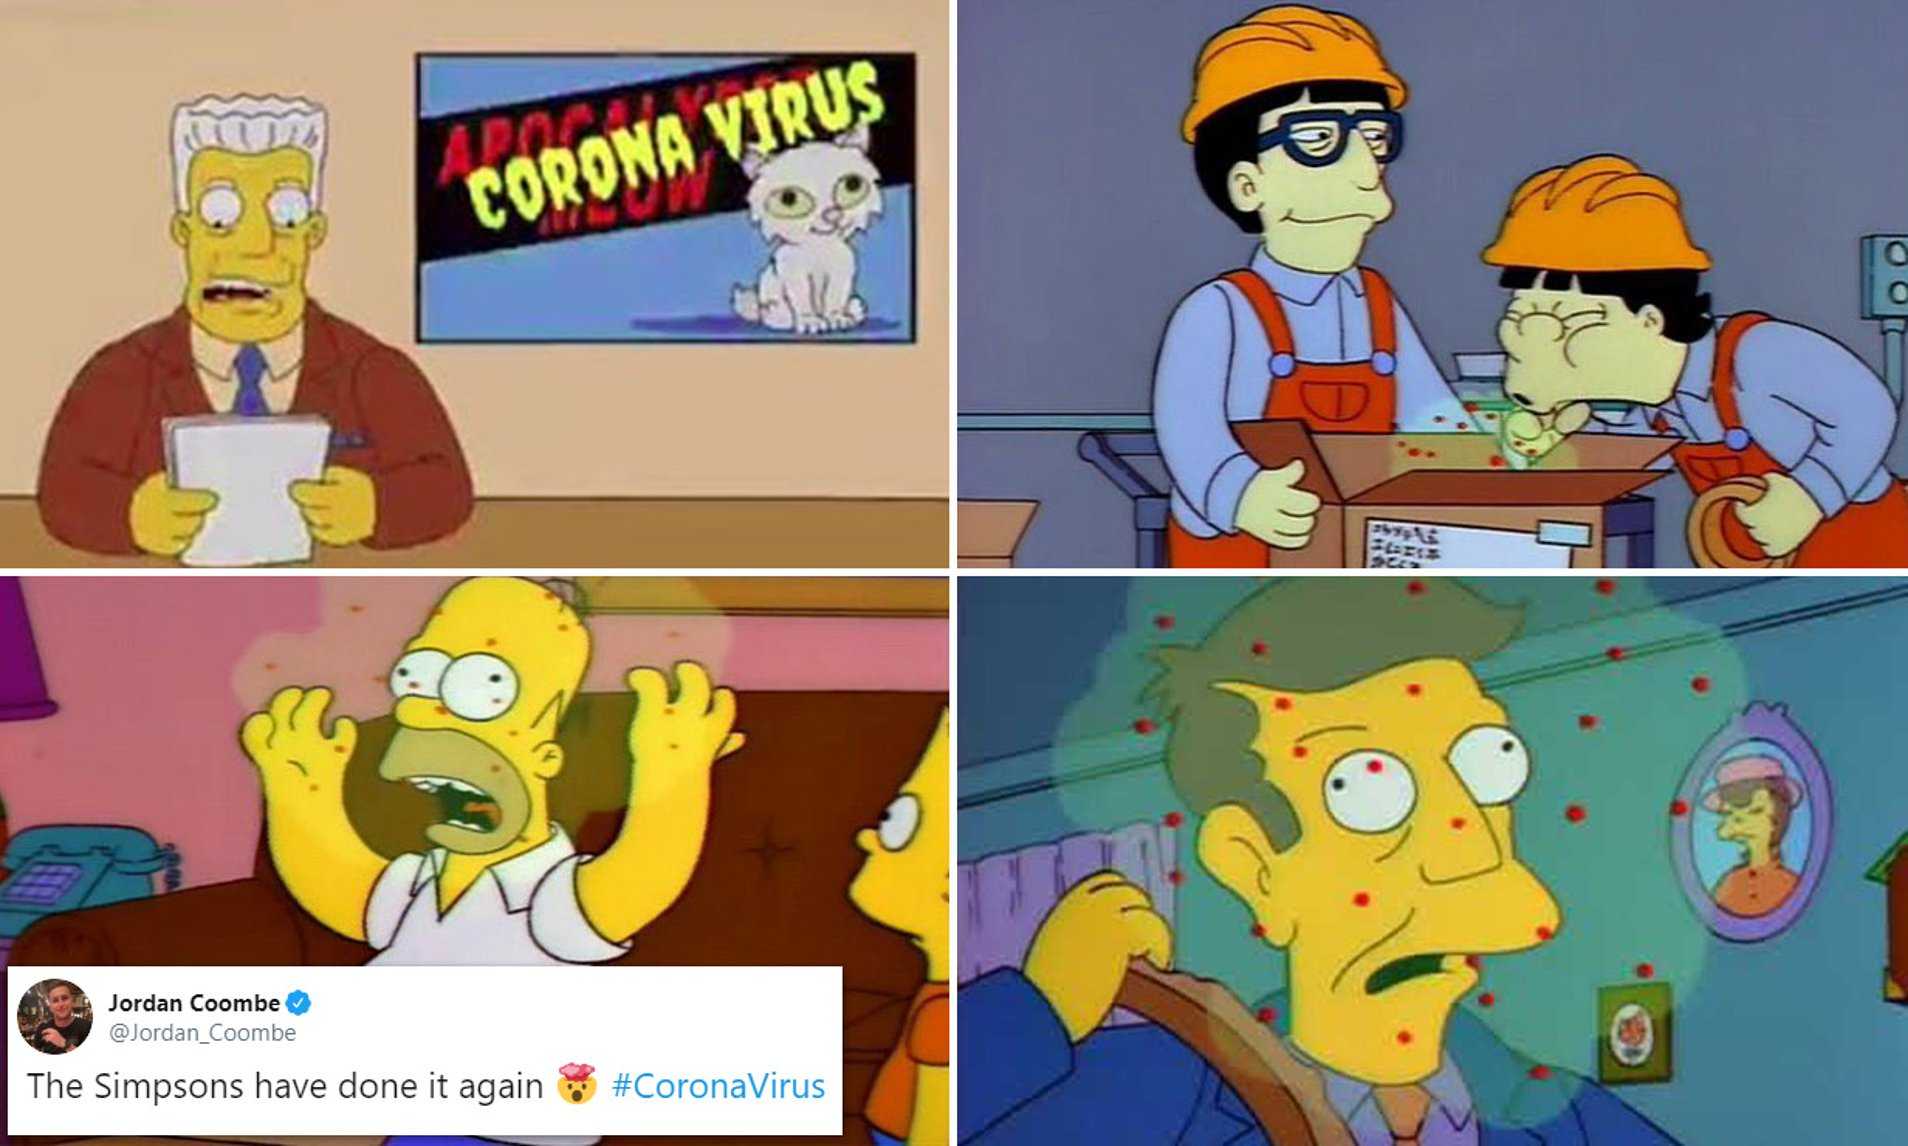 'Gross and Terrible' - Simpsons writer on COVID-19 predictions controversy